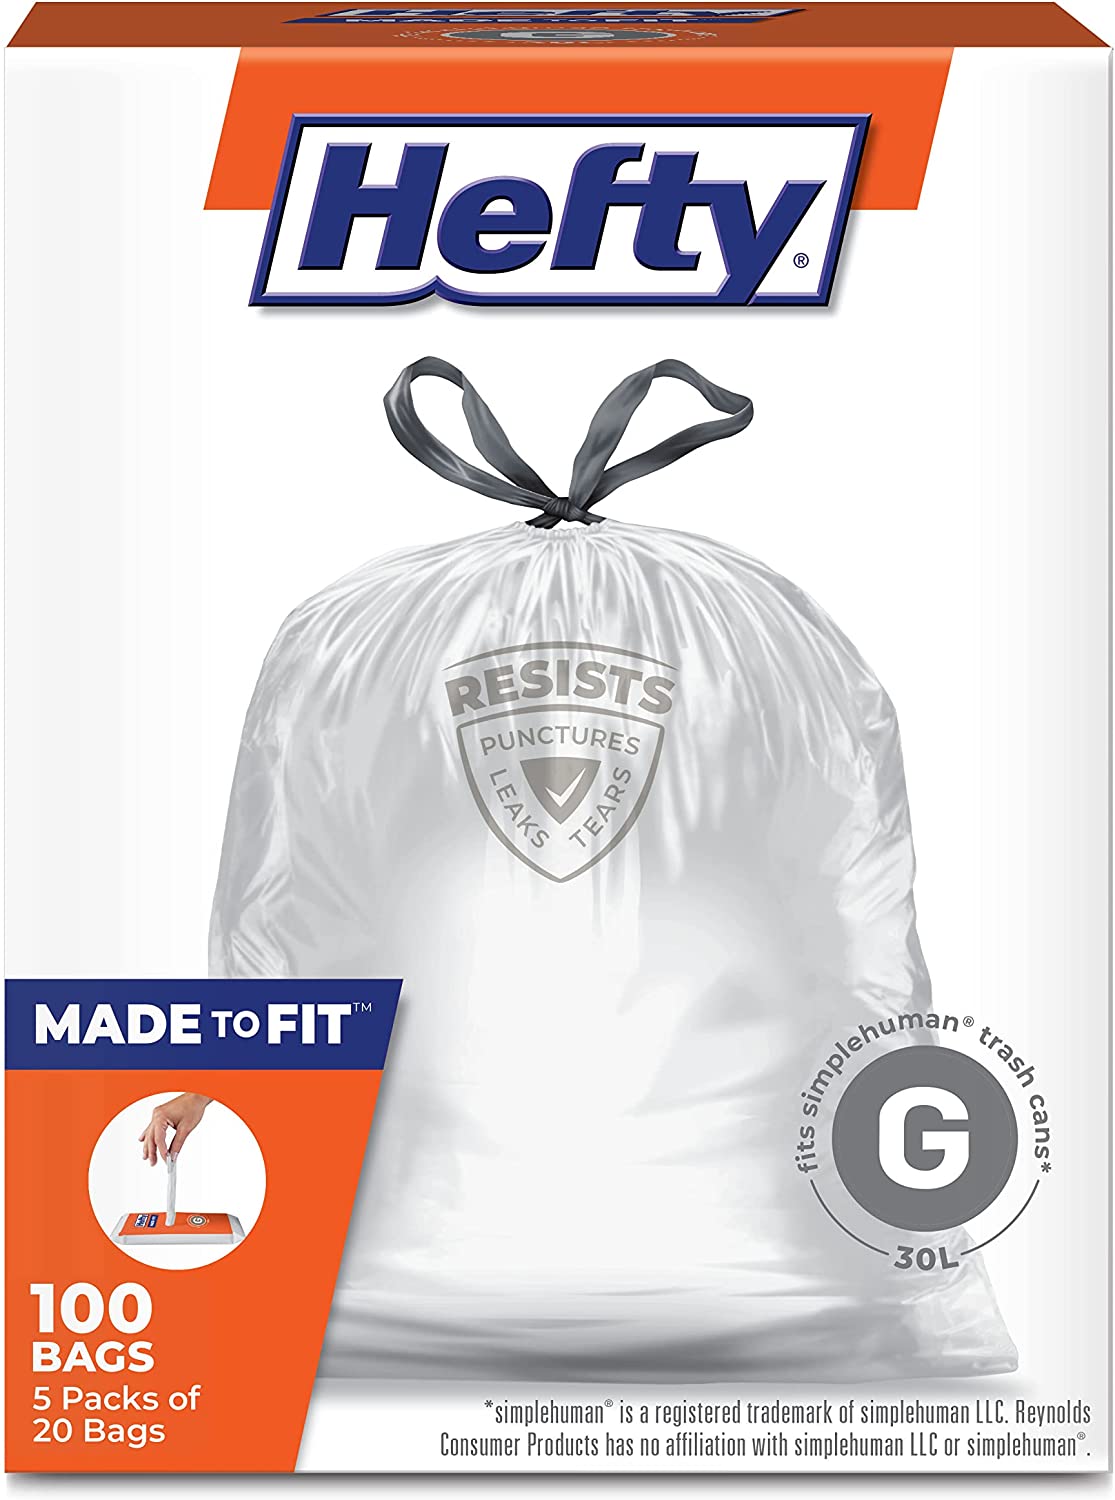 100-Count Hefty Made to Fit Trash Bags (8-Gallon or 9-Gallon) $12.15 w/ S&S & More + Free S&H w/ Prime or $25+